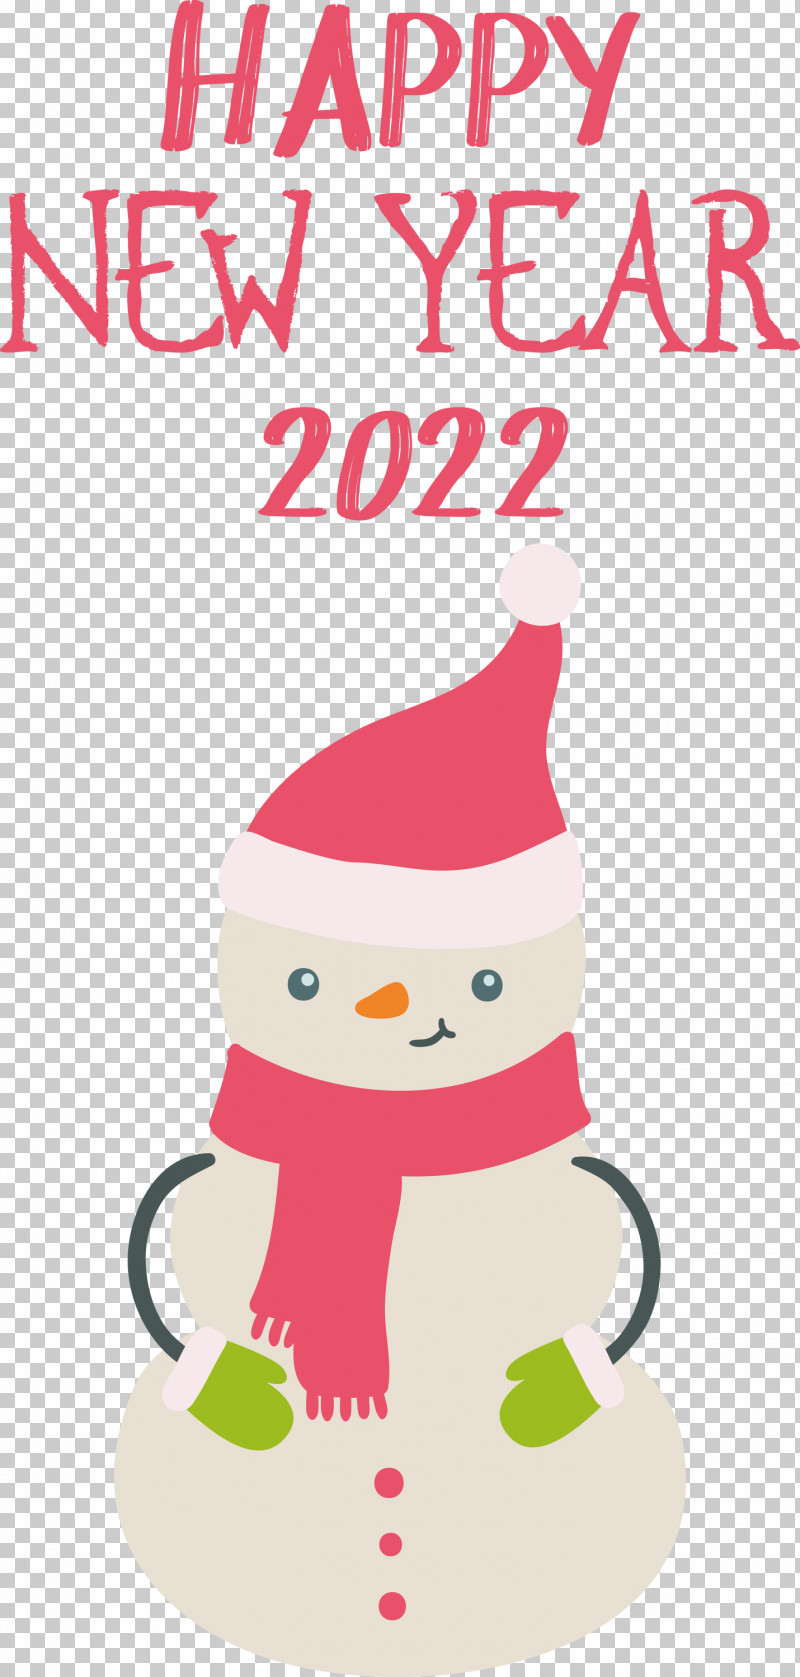 2022 New Year Happy New Year 2022 PNG, Clipart, Bauble, Cartoon, Character, Christmas Day, Christmas Tree Free PNG Download